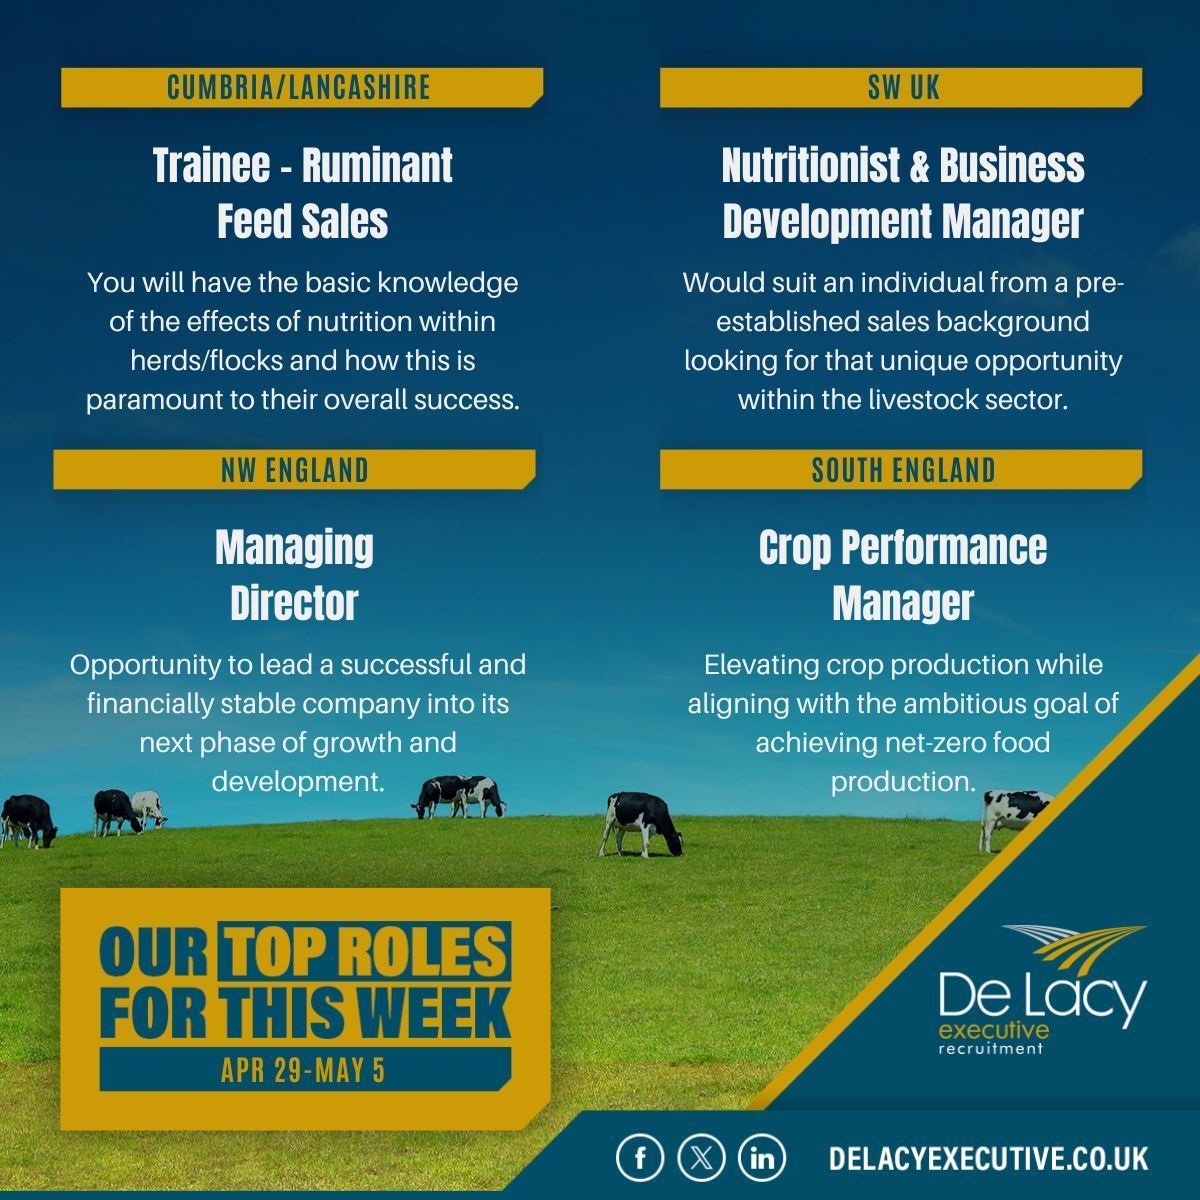 Top Roles for This Week: April 29 - May 5 ⬇️ 

There's plenty of opportunities available, from #Crop Performance Manager to a #ManagingDirector position, these are our Top Roles of the Week!

Explore these #careers & more: delacyexecutive.co.uk/job-seekers/jo… 

#UKAg #UKJobs #AgJobs